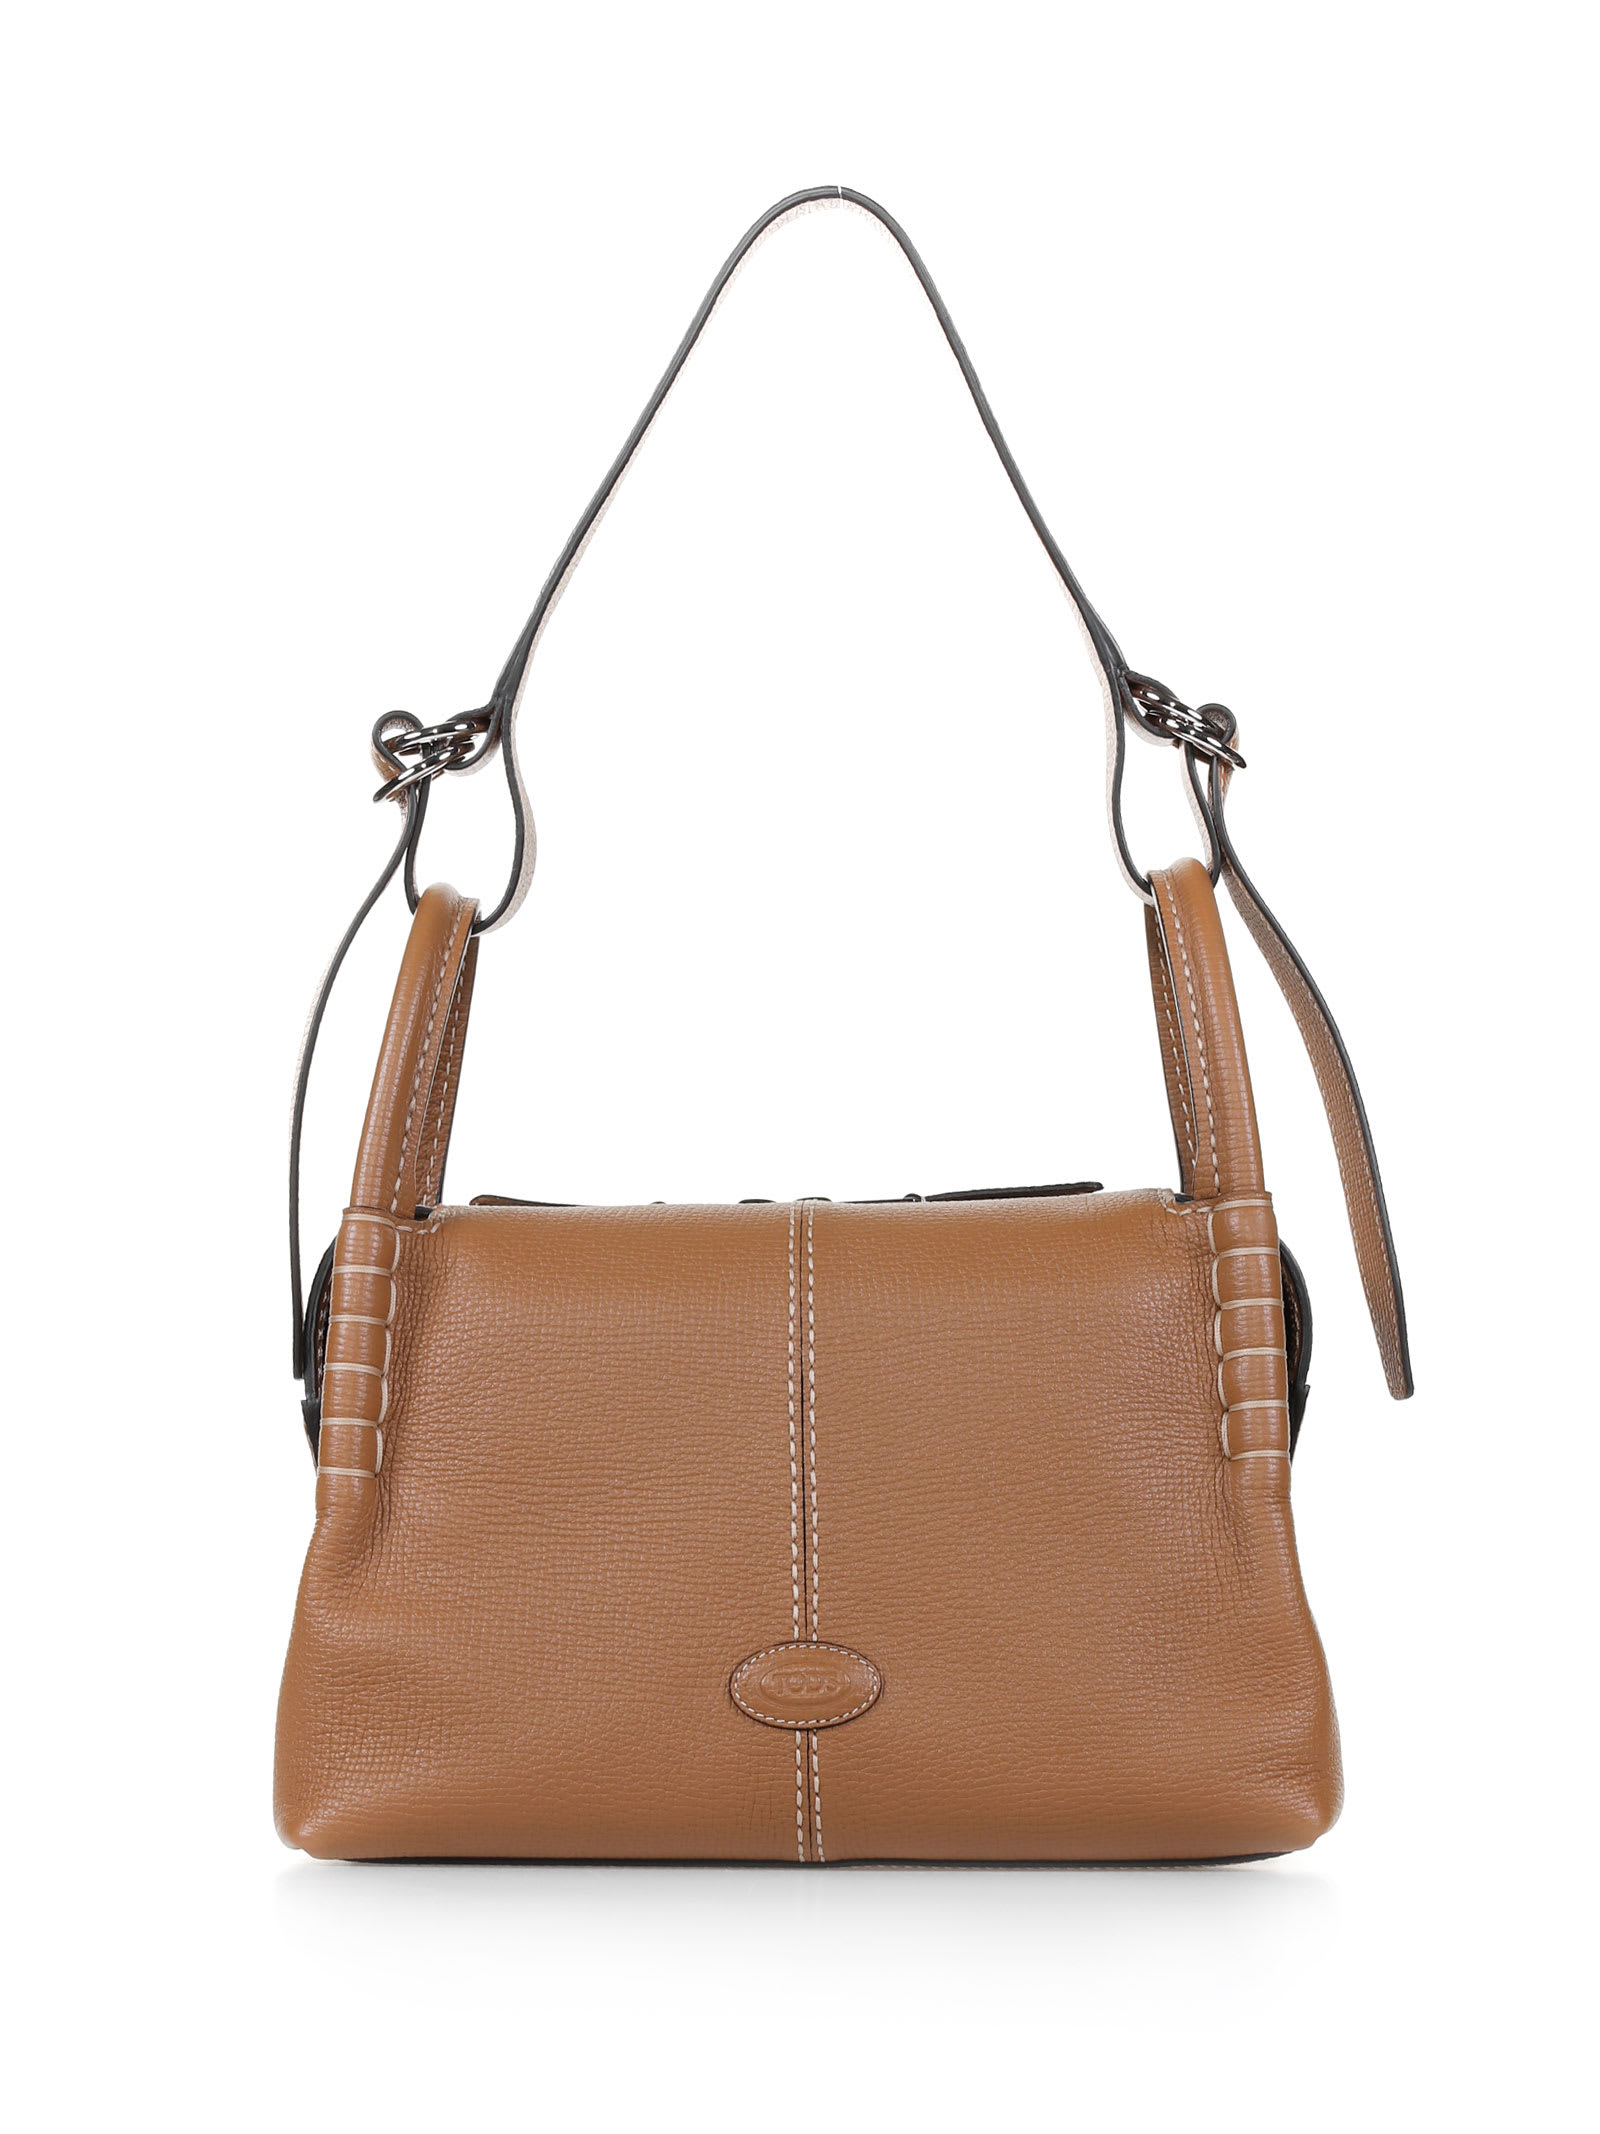 Tods Kenia Leather Tote Bag